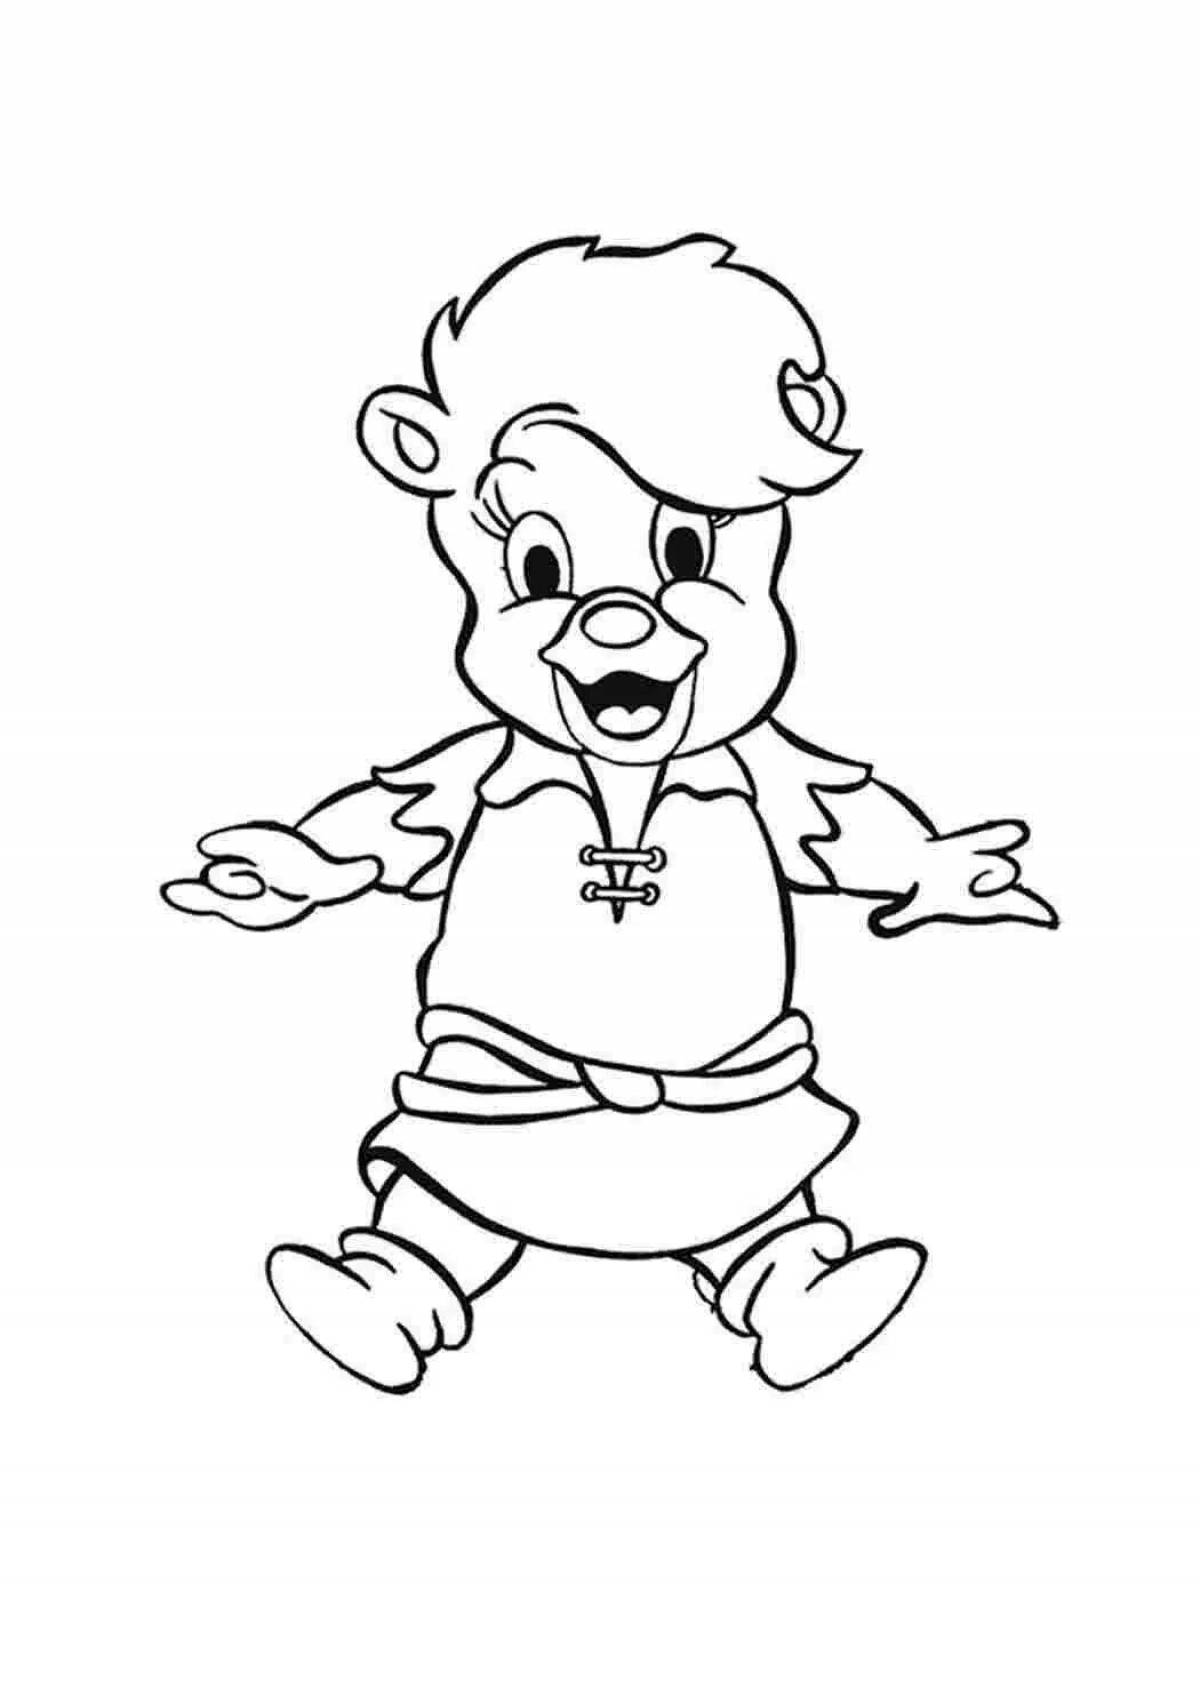 Sunny gummy bear coloring page